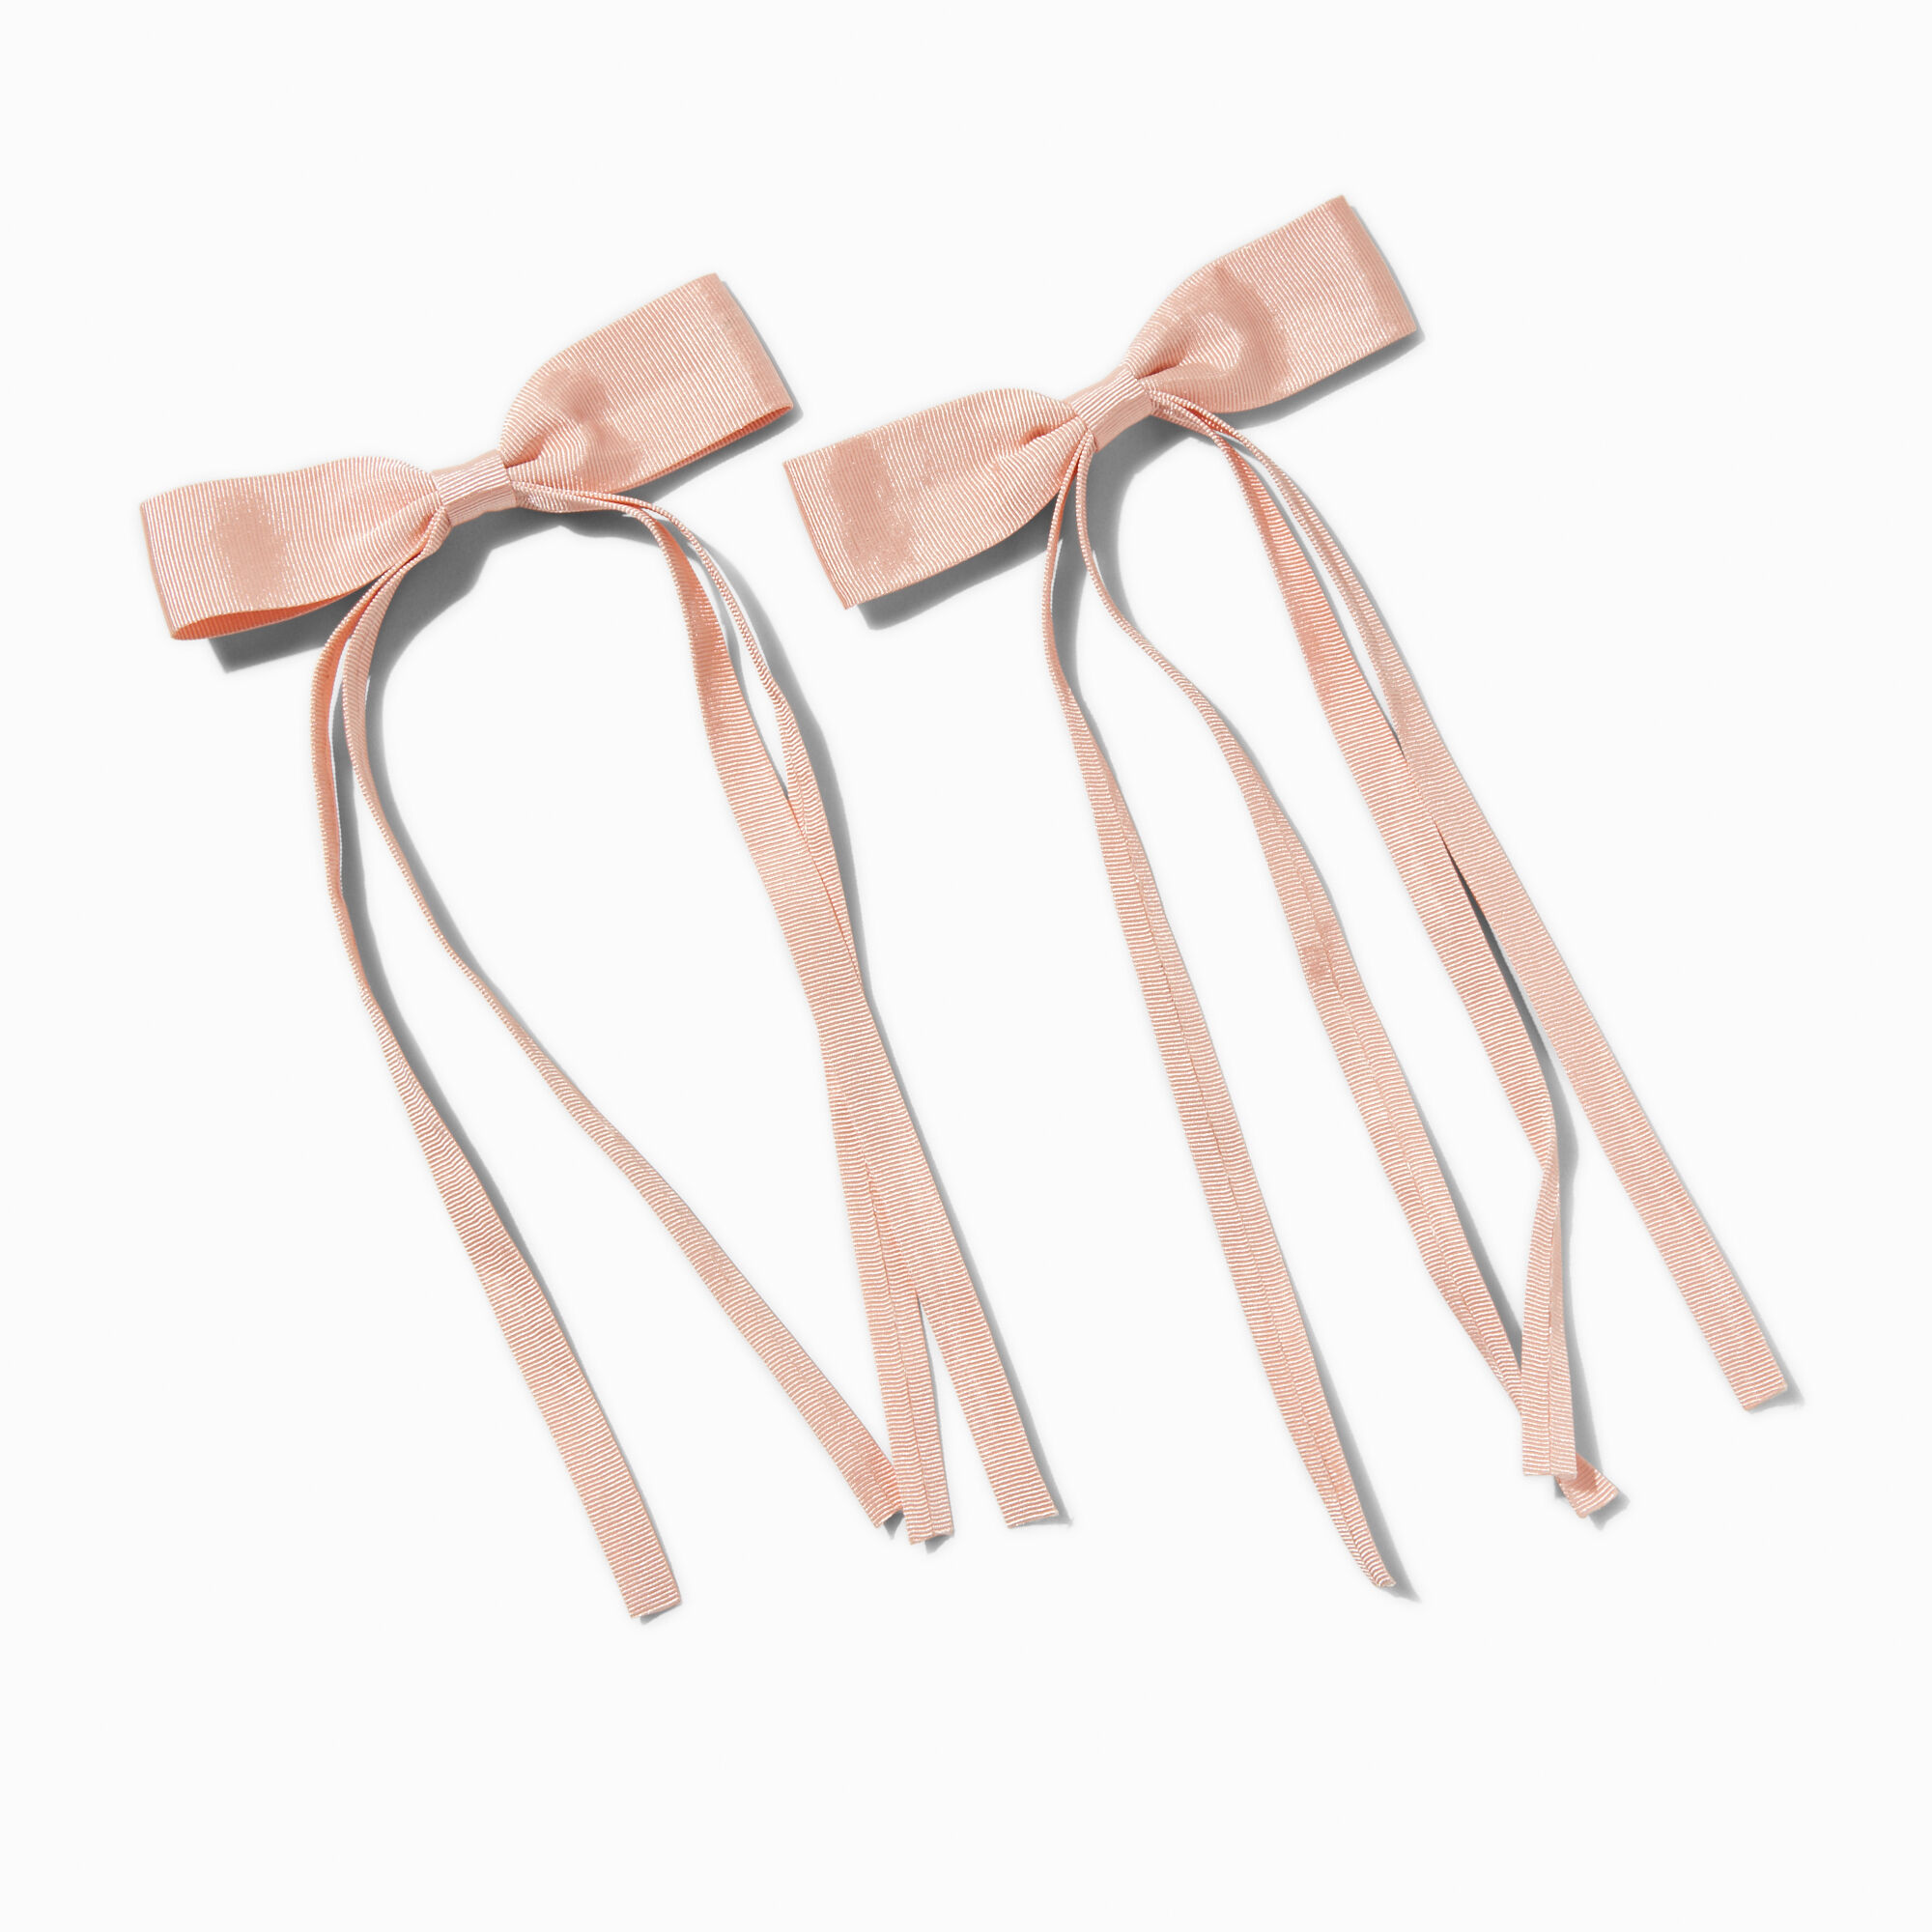 View Claires Blush Grosgrain Ribbon Long Tail Hair Bow Clips 2 Pack Pink information